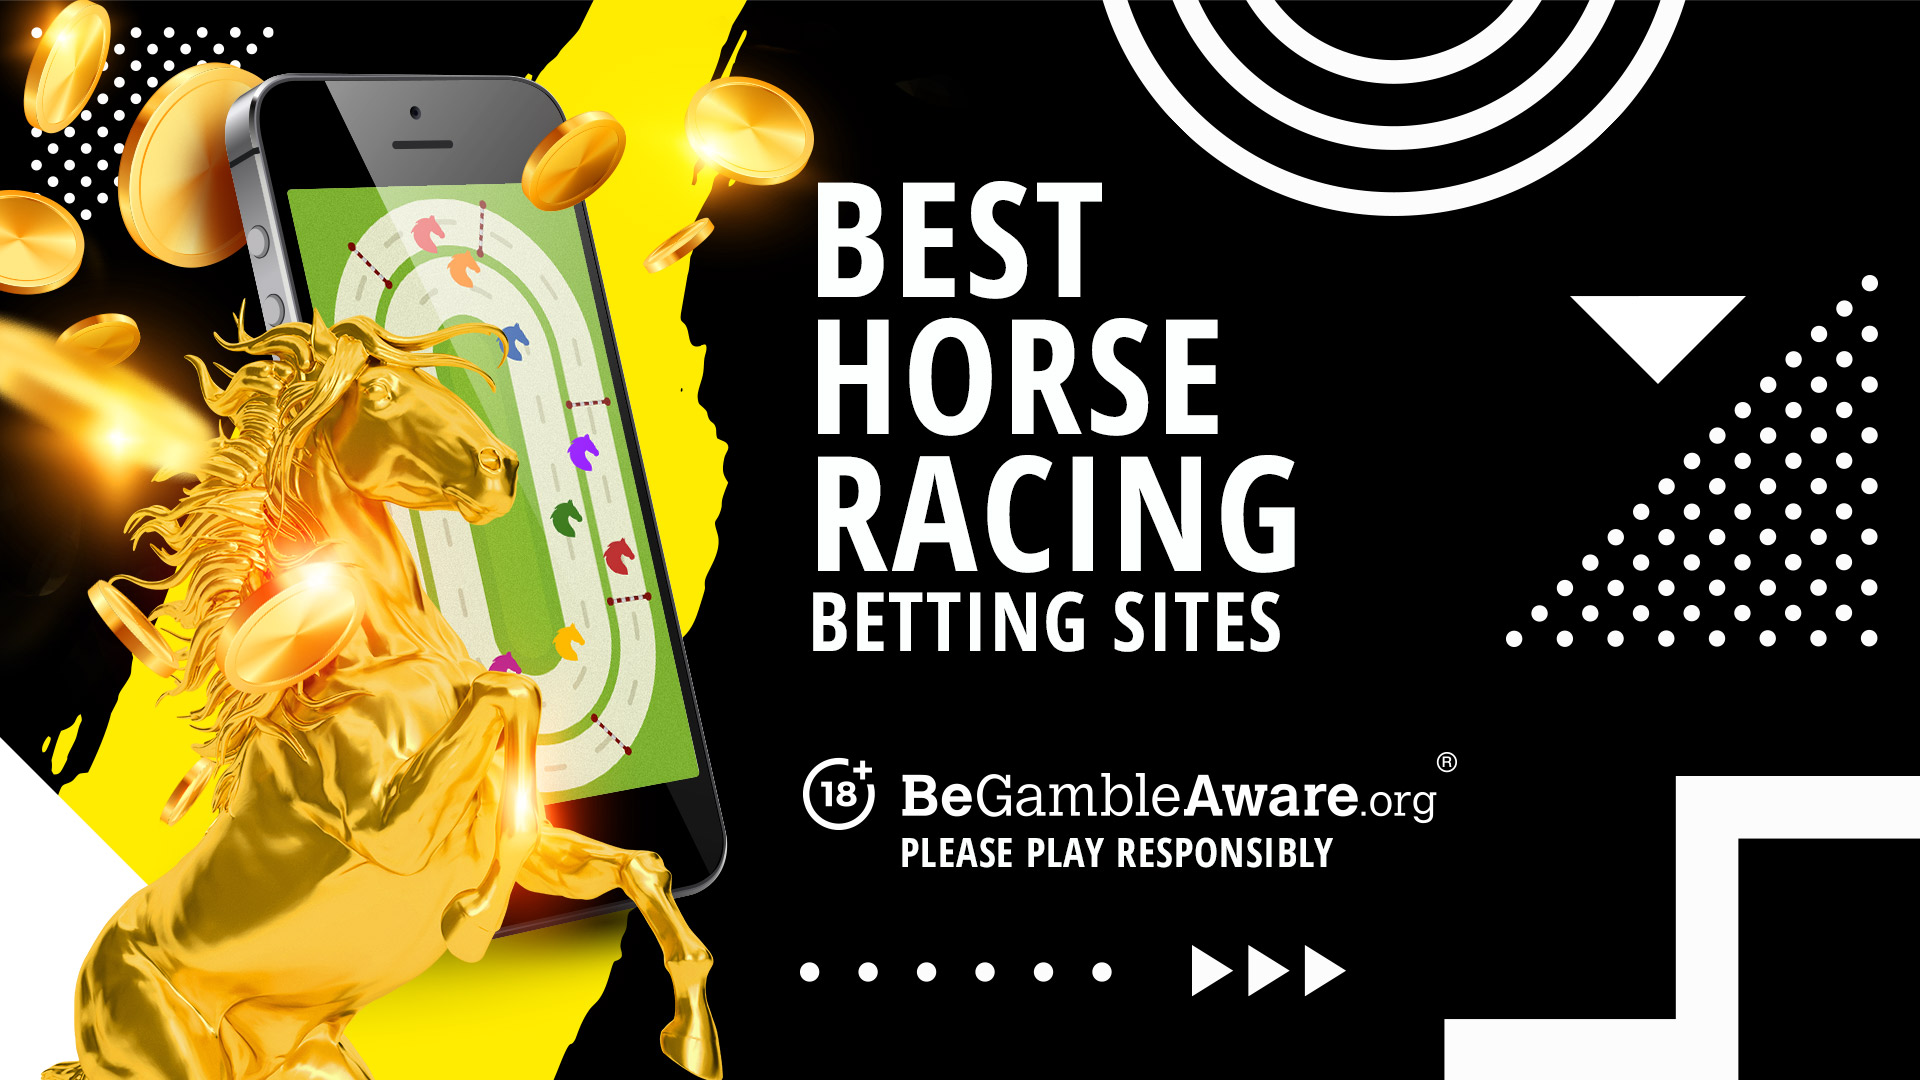 Photo: horse racing betting sites